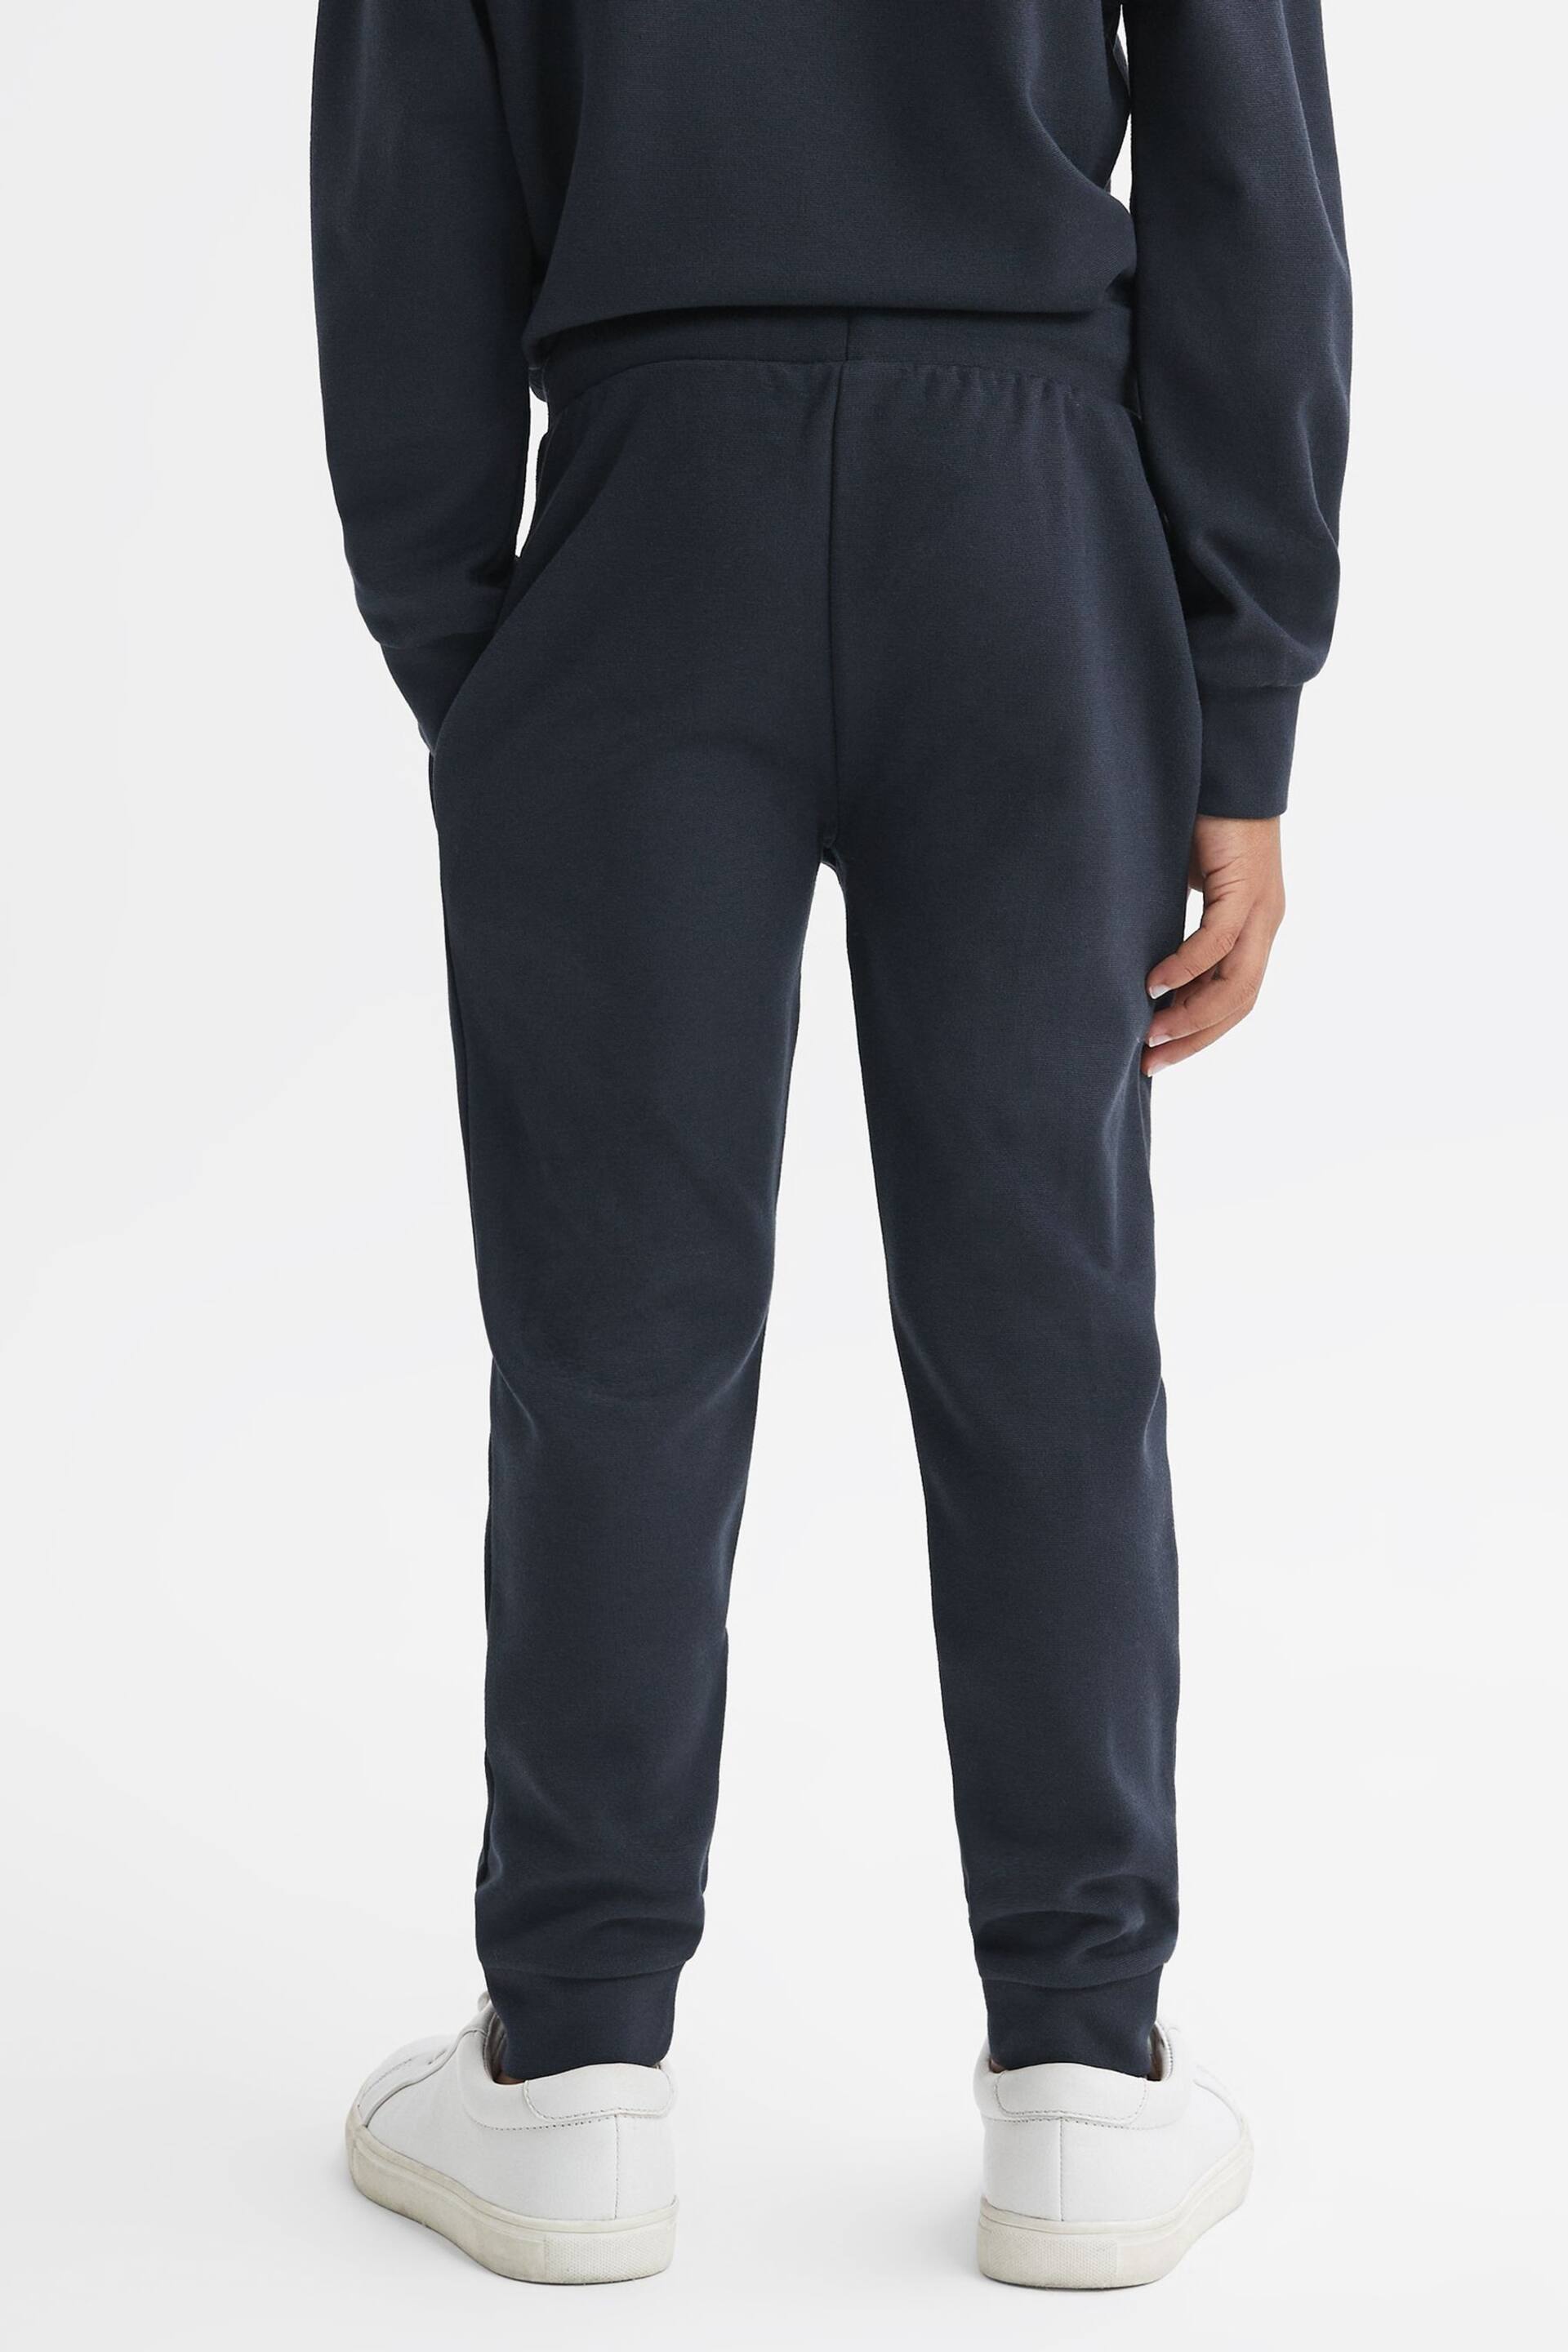 Reiss Navy Croxley Junior Relaxed Drawstring Joggers - Image 5 of 6